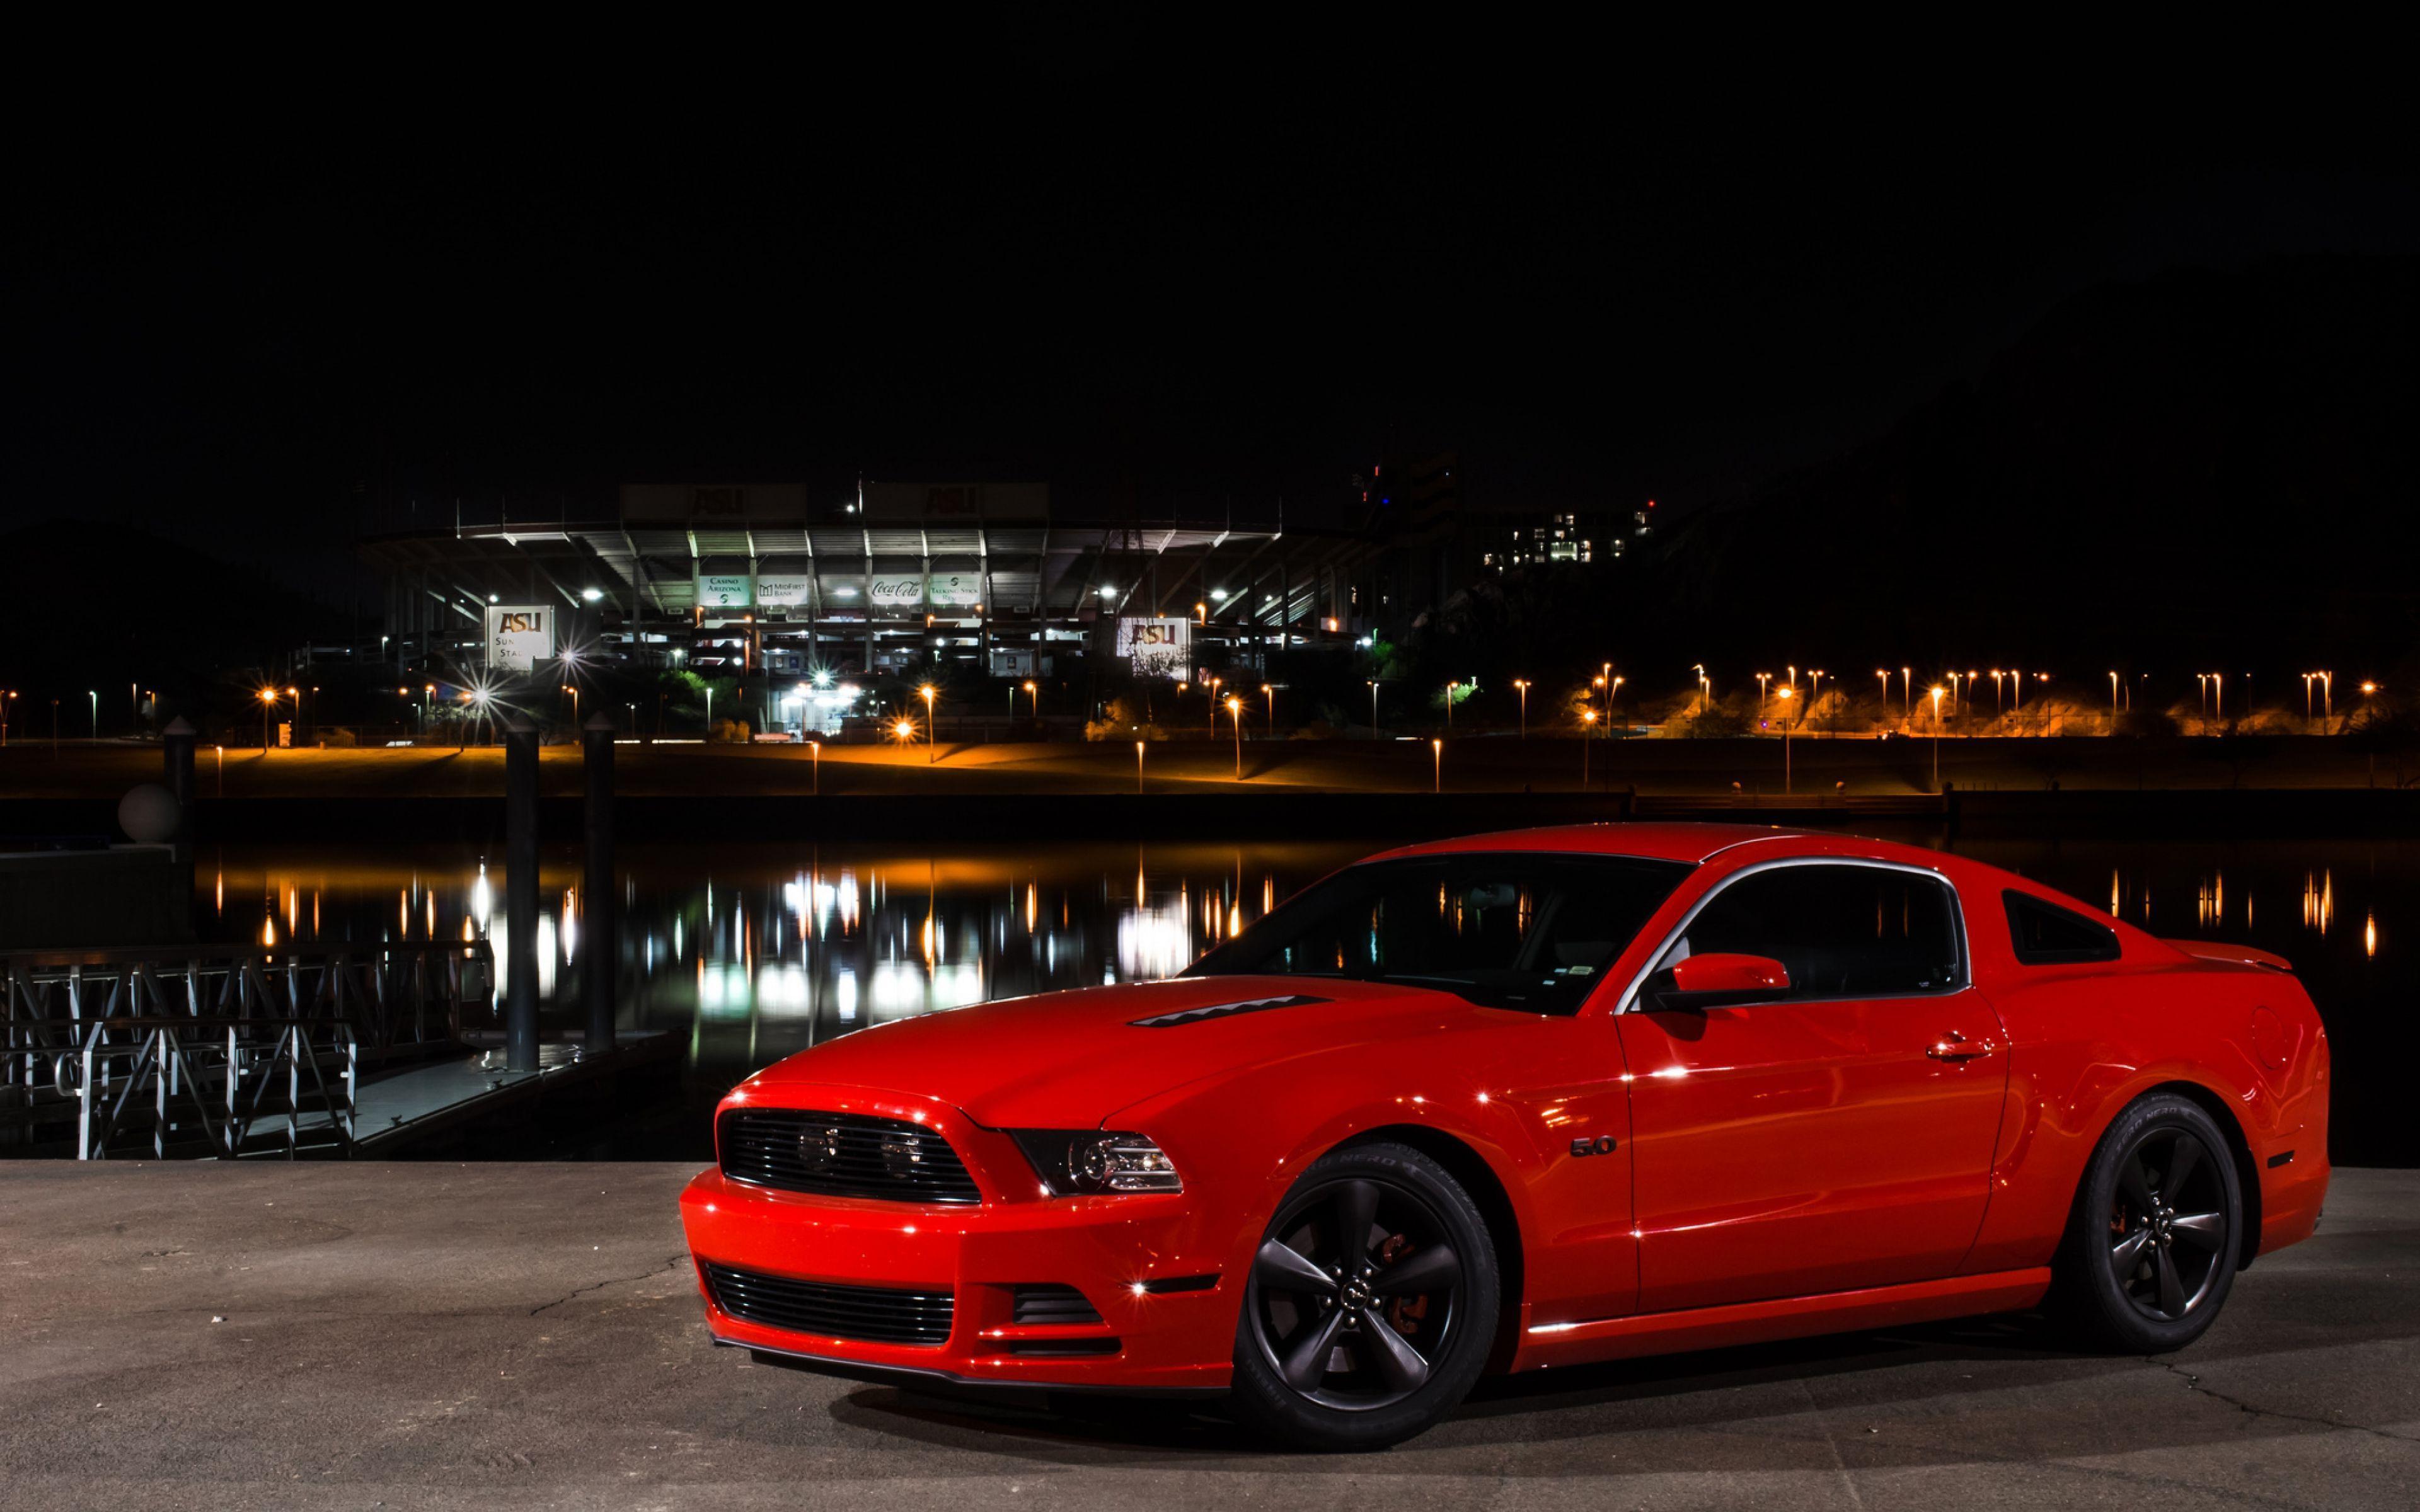 Red Mustang Wallpapers - Top Free Red